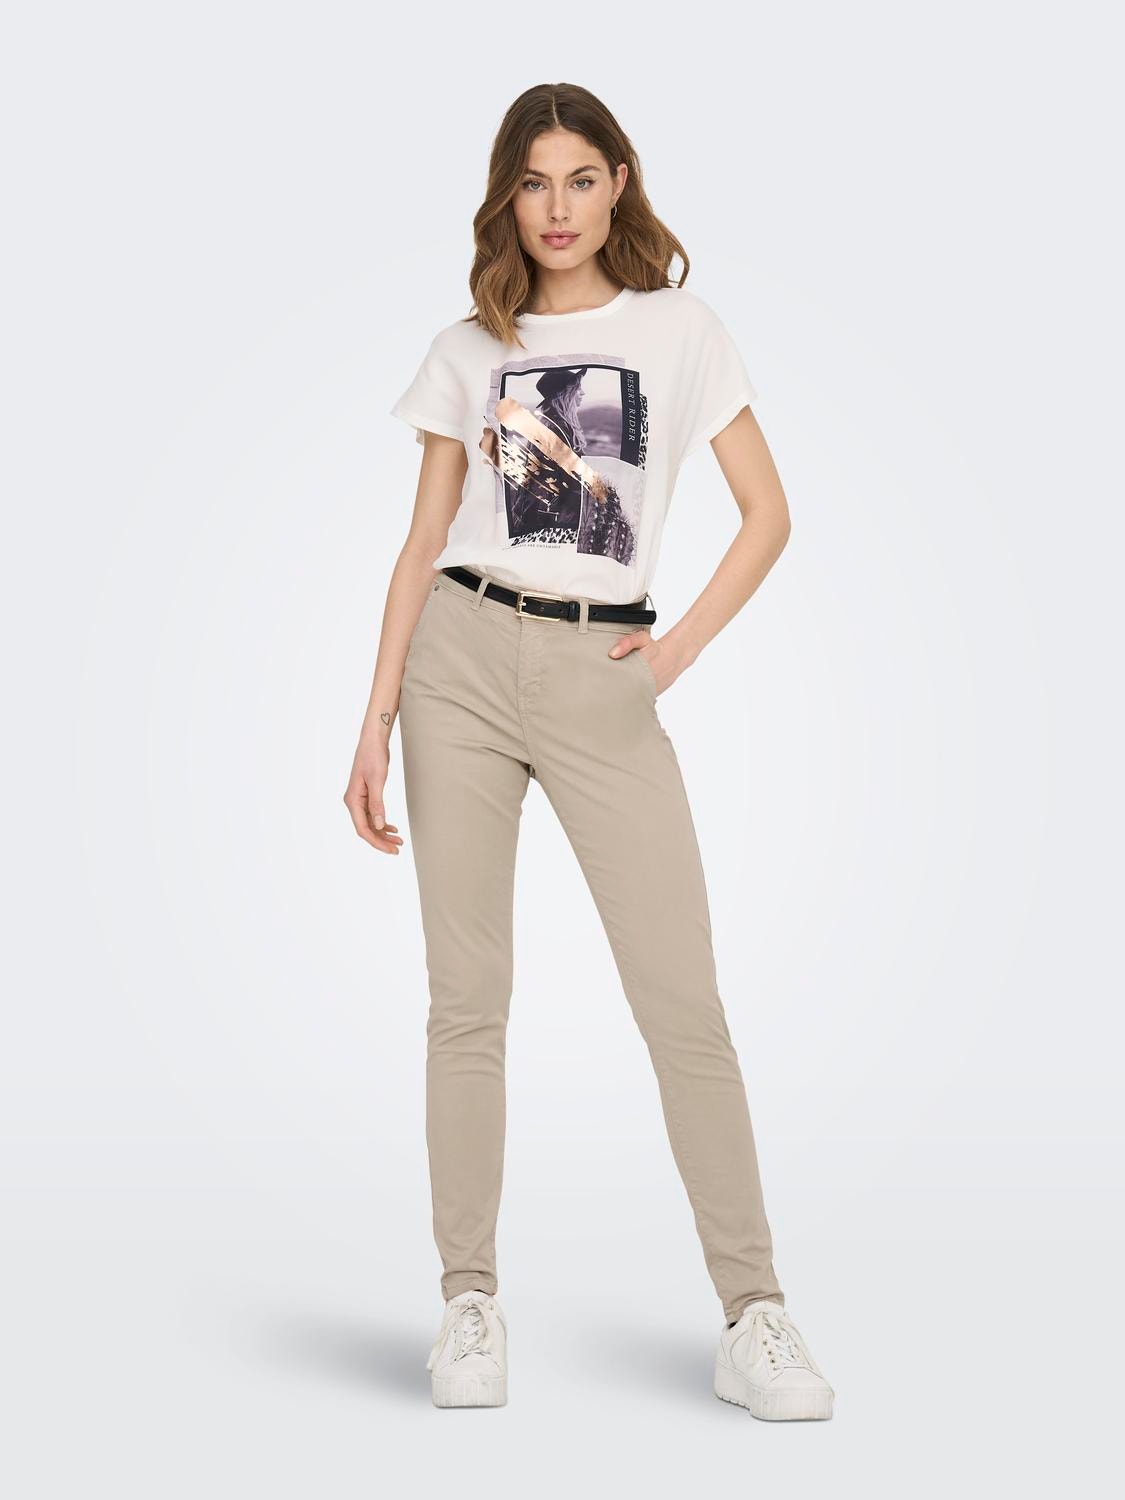 ONLY High waisted Chinos -Oxford Tan - 15278924